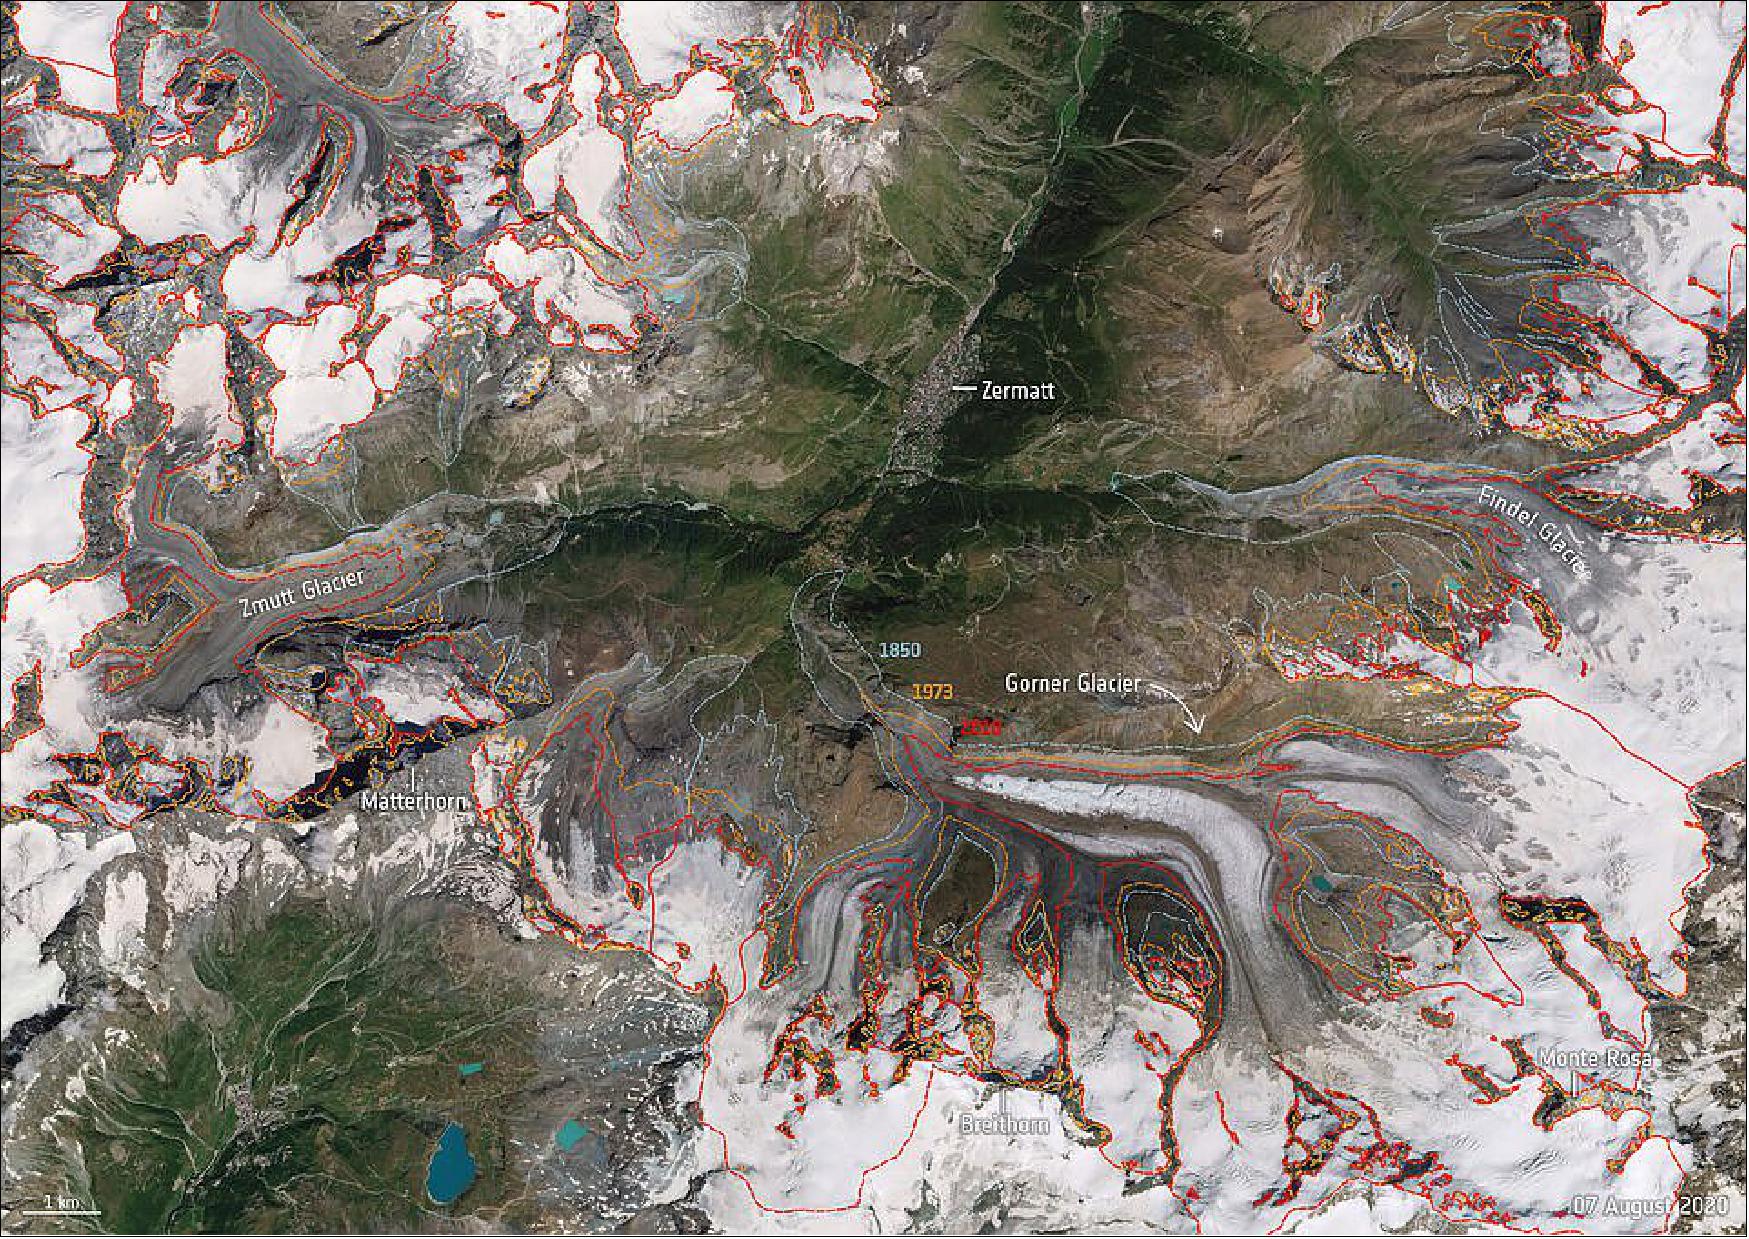 Figure 2: The map shows the historic outlines of the Gorner Glacier system and the surrounding area. The data has been retrieved from the Glacier Monitoring in Switzerland (GLAMOS) database and overlaid on a Copernicus Sentinel-2 image captured on 7 August 2020 to show the recent state of the glacier systems of the area [image credit: ESA, the image contains modified Copernicus Sentinel data (2020), processed by ESA. Historical glacier data from Glacier Monitoring in Switzerland (GLAMOS)]